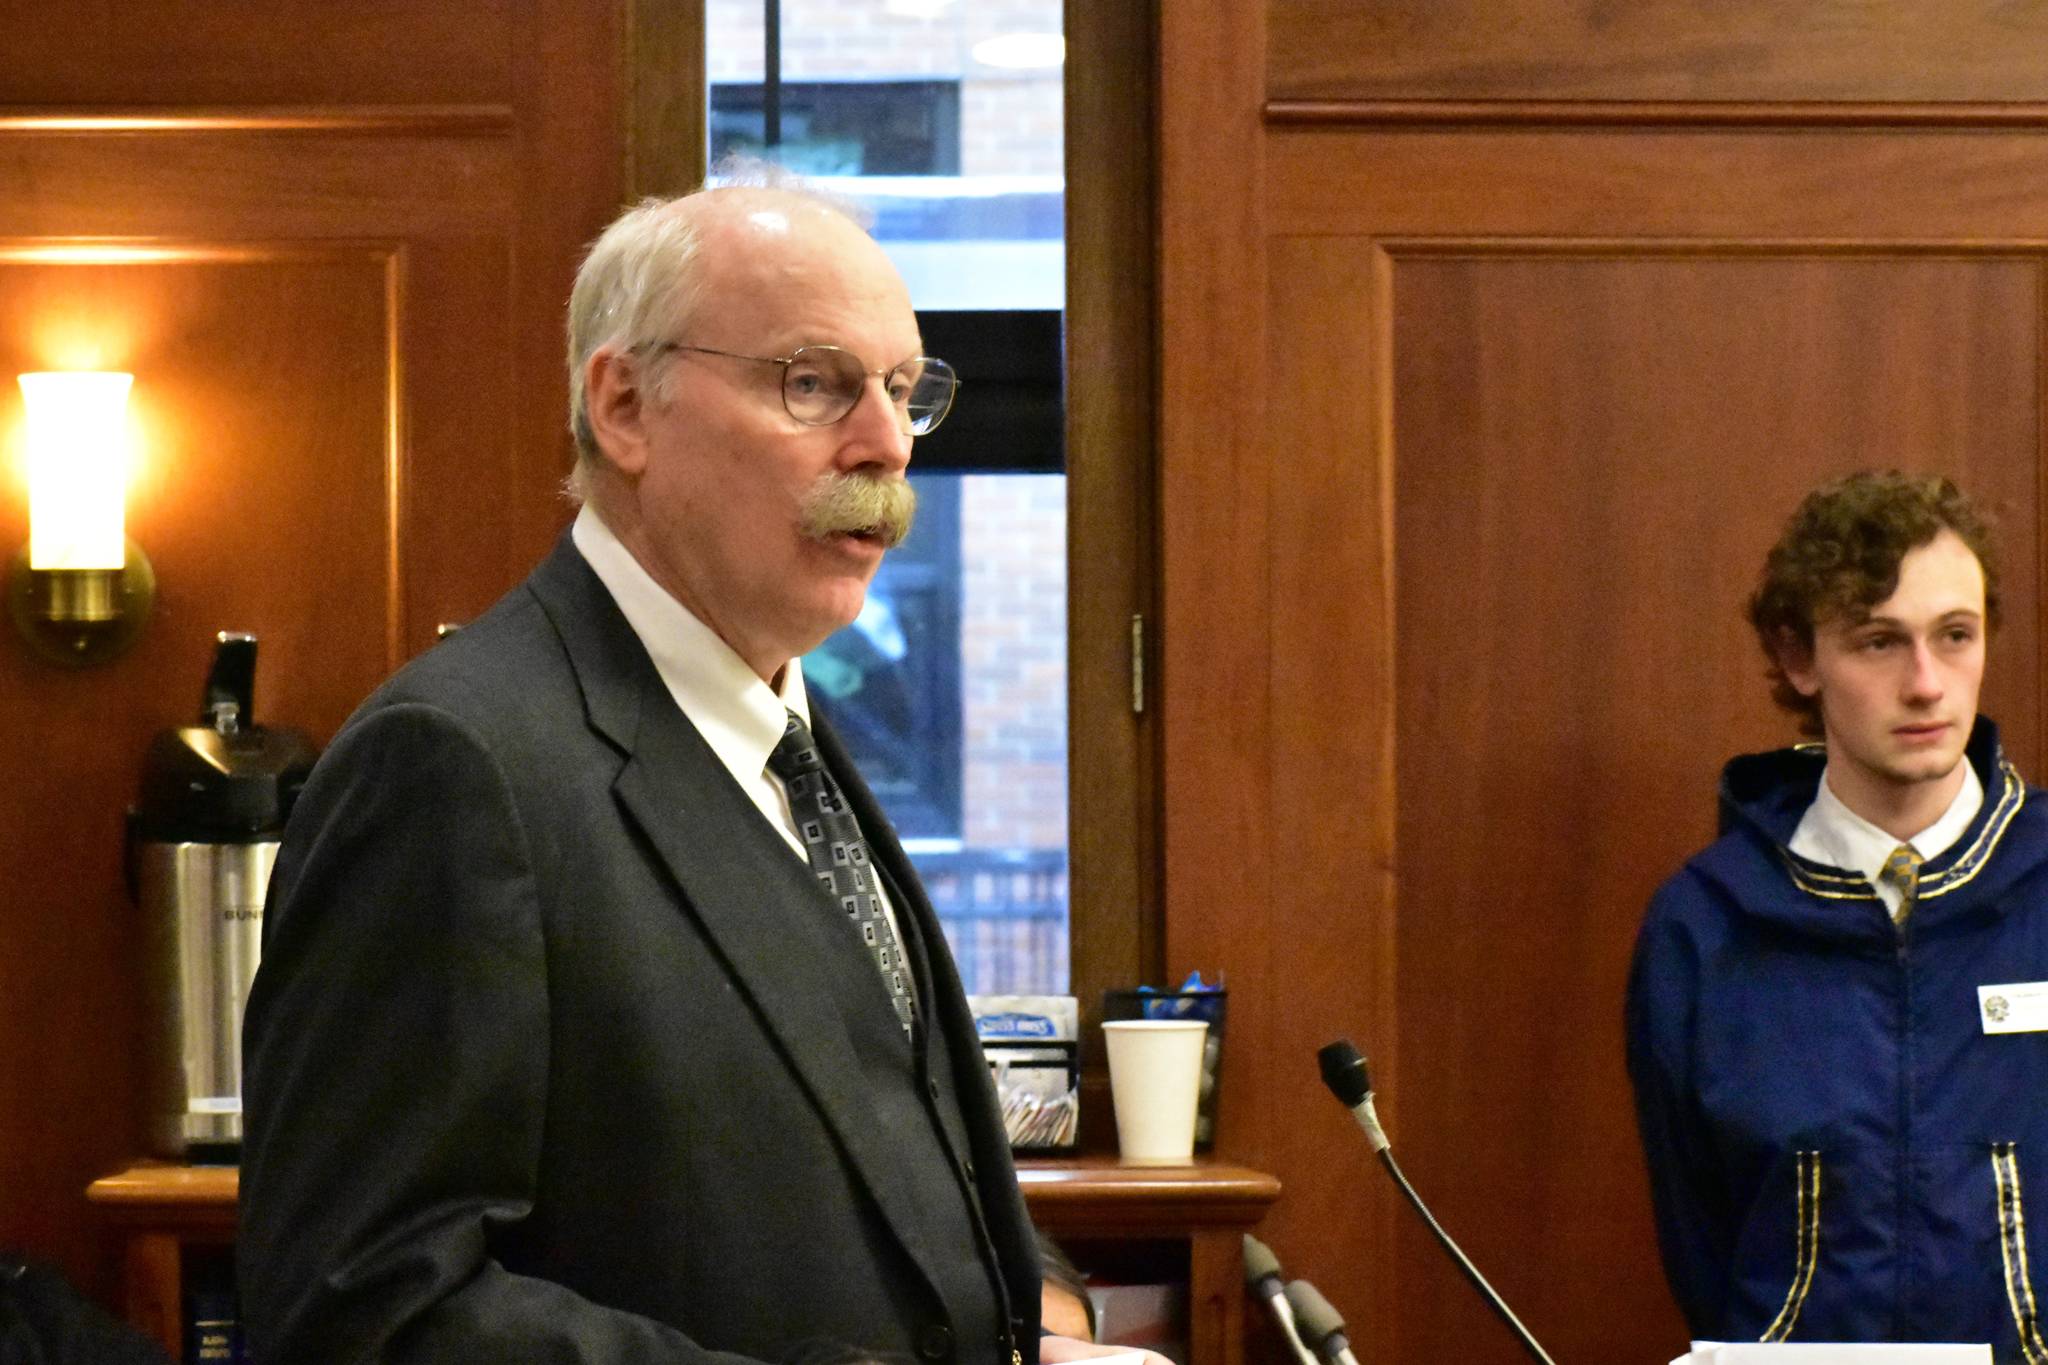 Sen. Bert Stedman, R-Sitka, speaks in support of overriding Gov. Mike Dunleavy’s vetoes during a joint session on Friday. (Peter Segall | Juneau Empire)